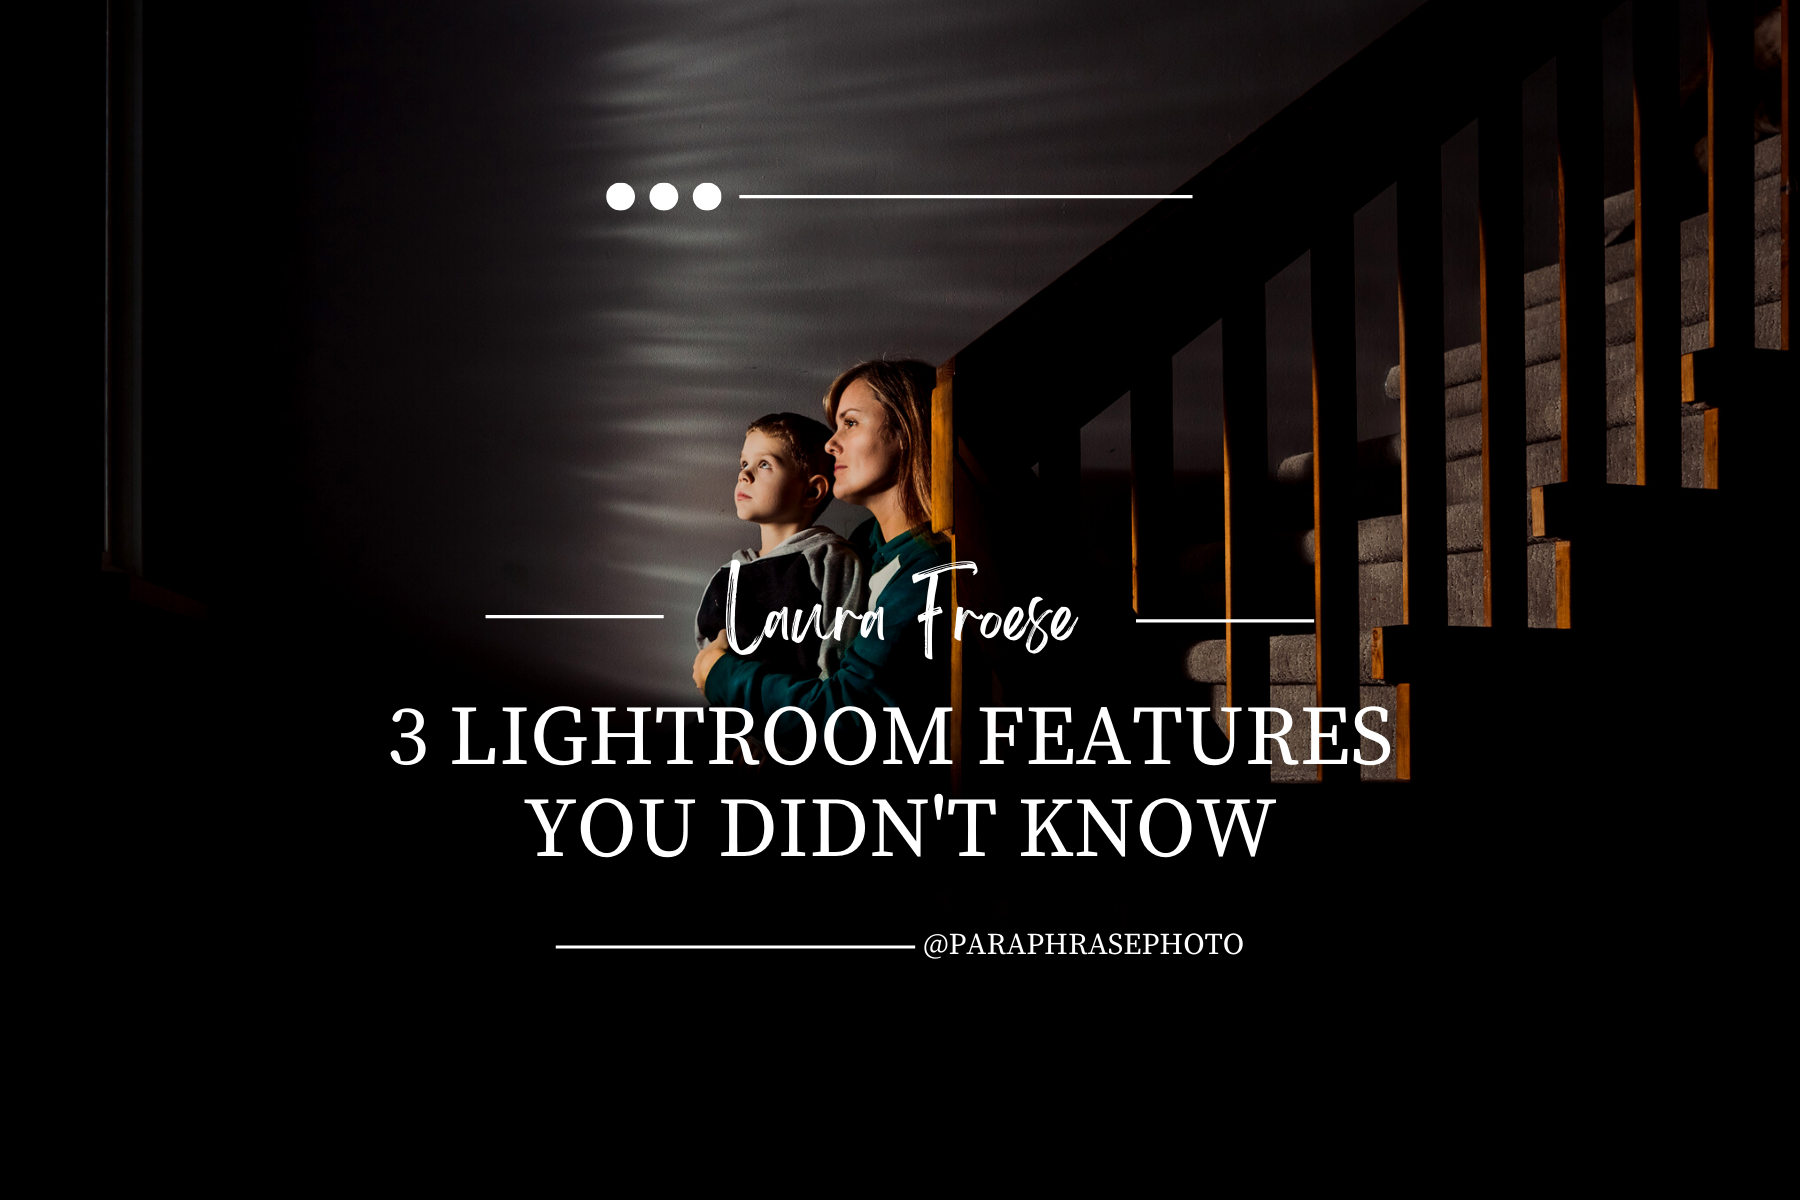 3 Lightroom Features You Didn't Know